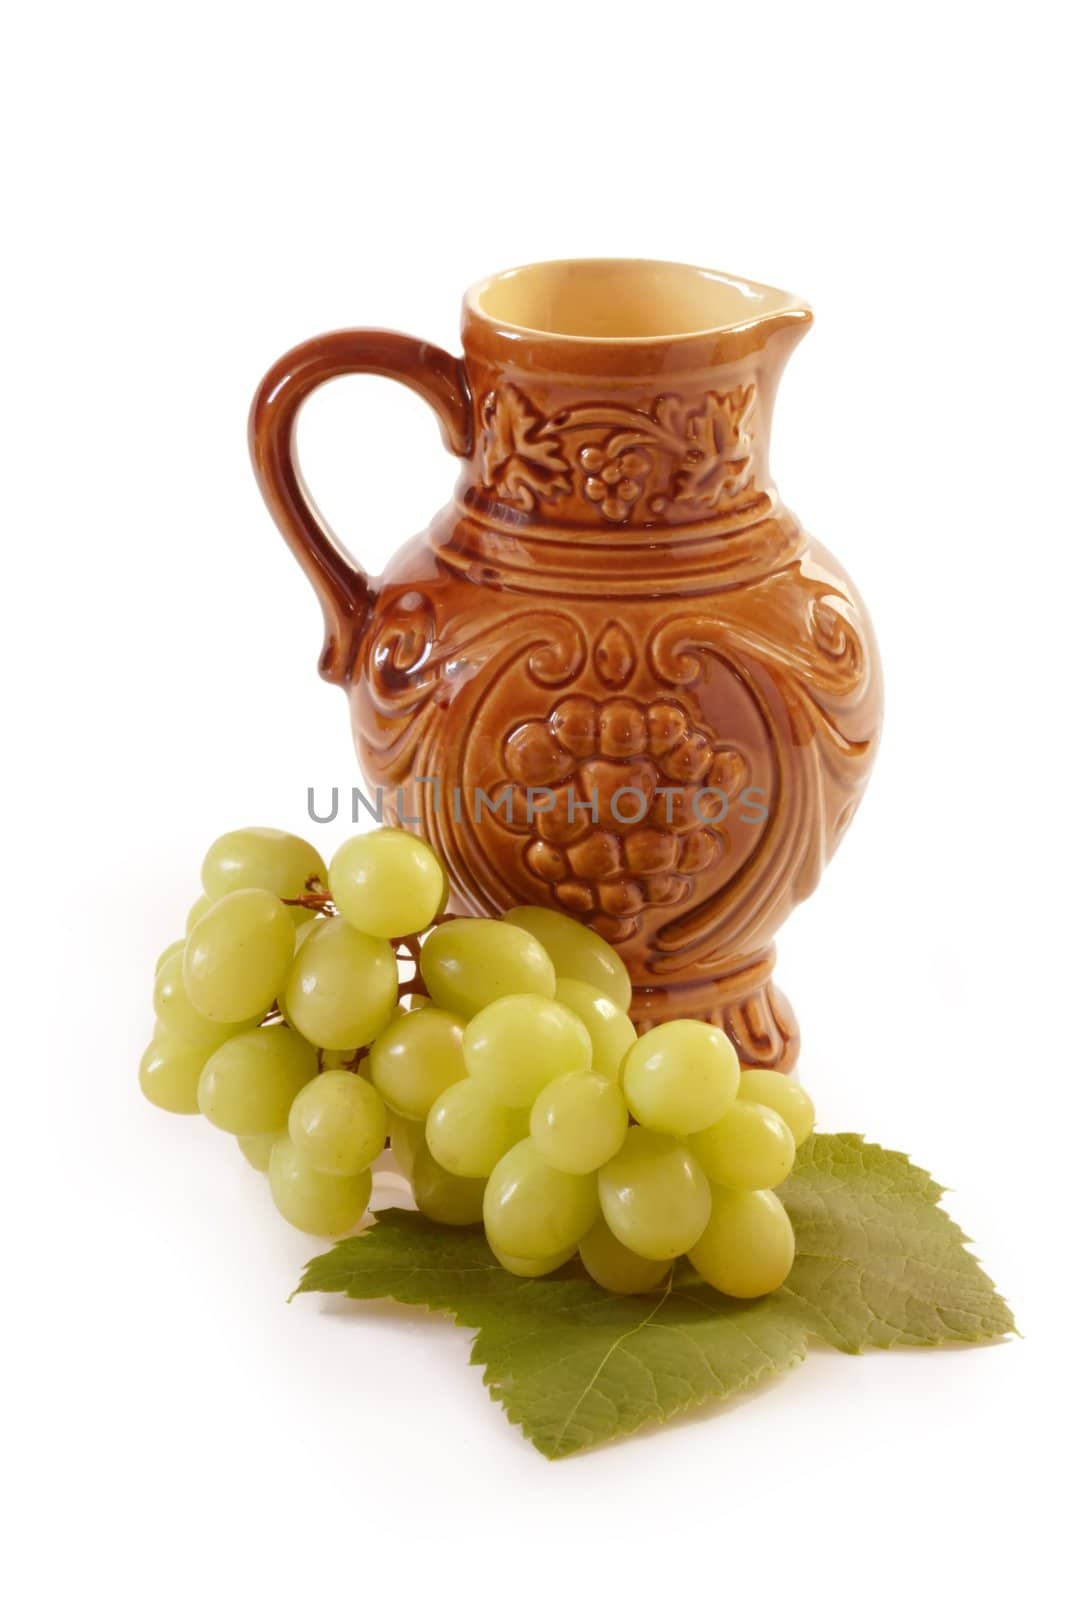 Wine Jug with Grapes by Teamarbeit